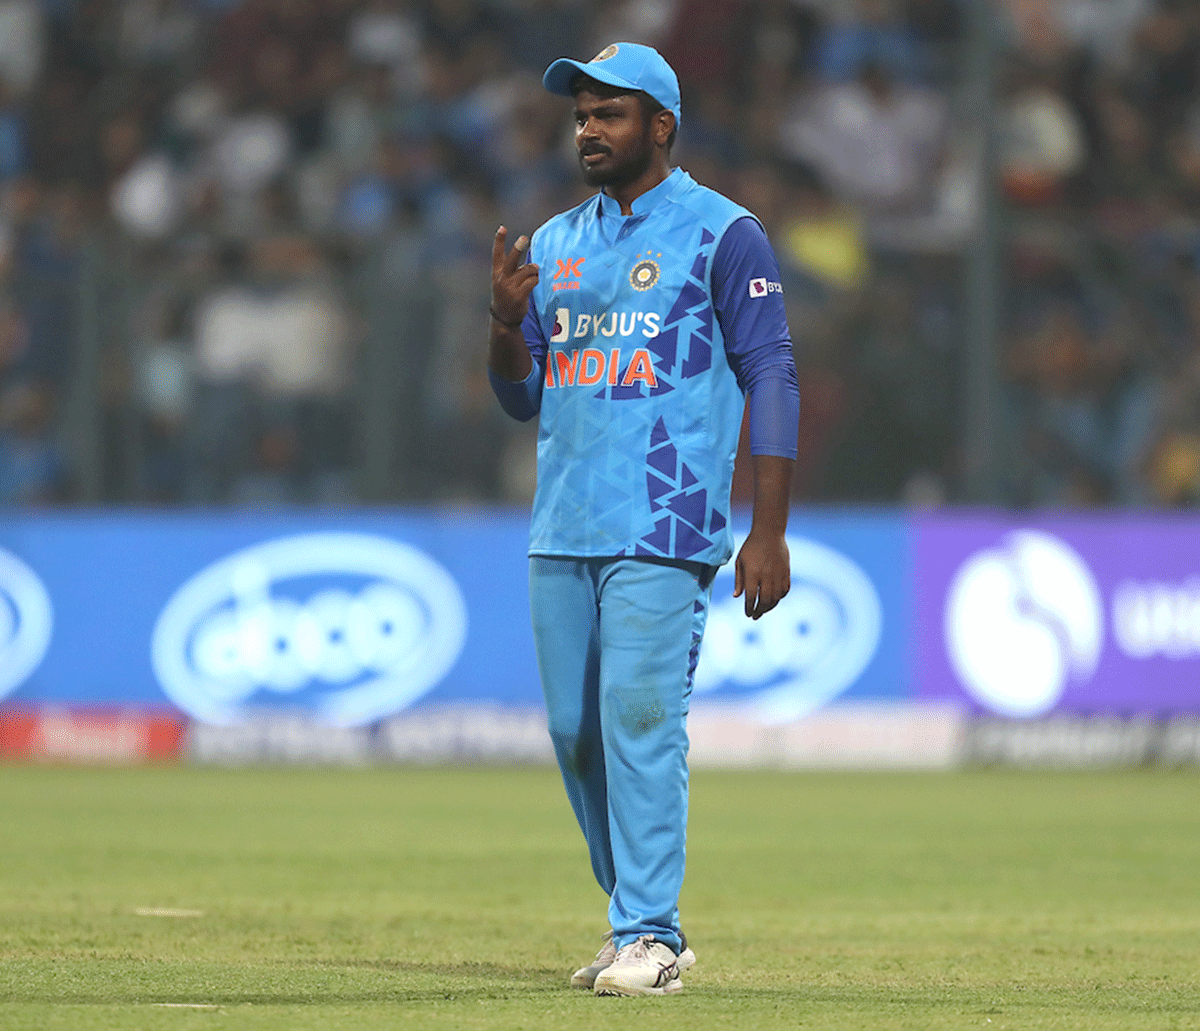 Sanju Samson hurt his knee while fielding during the first match against Sri Lanka on Tuesday